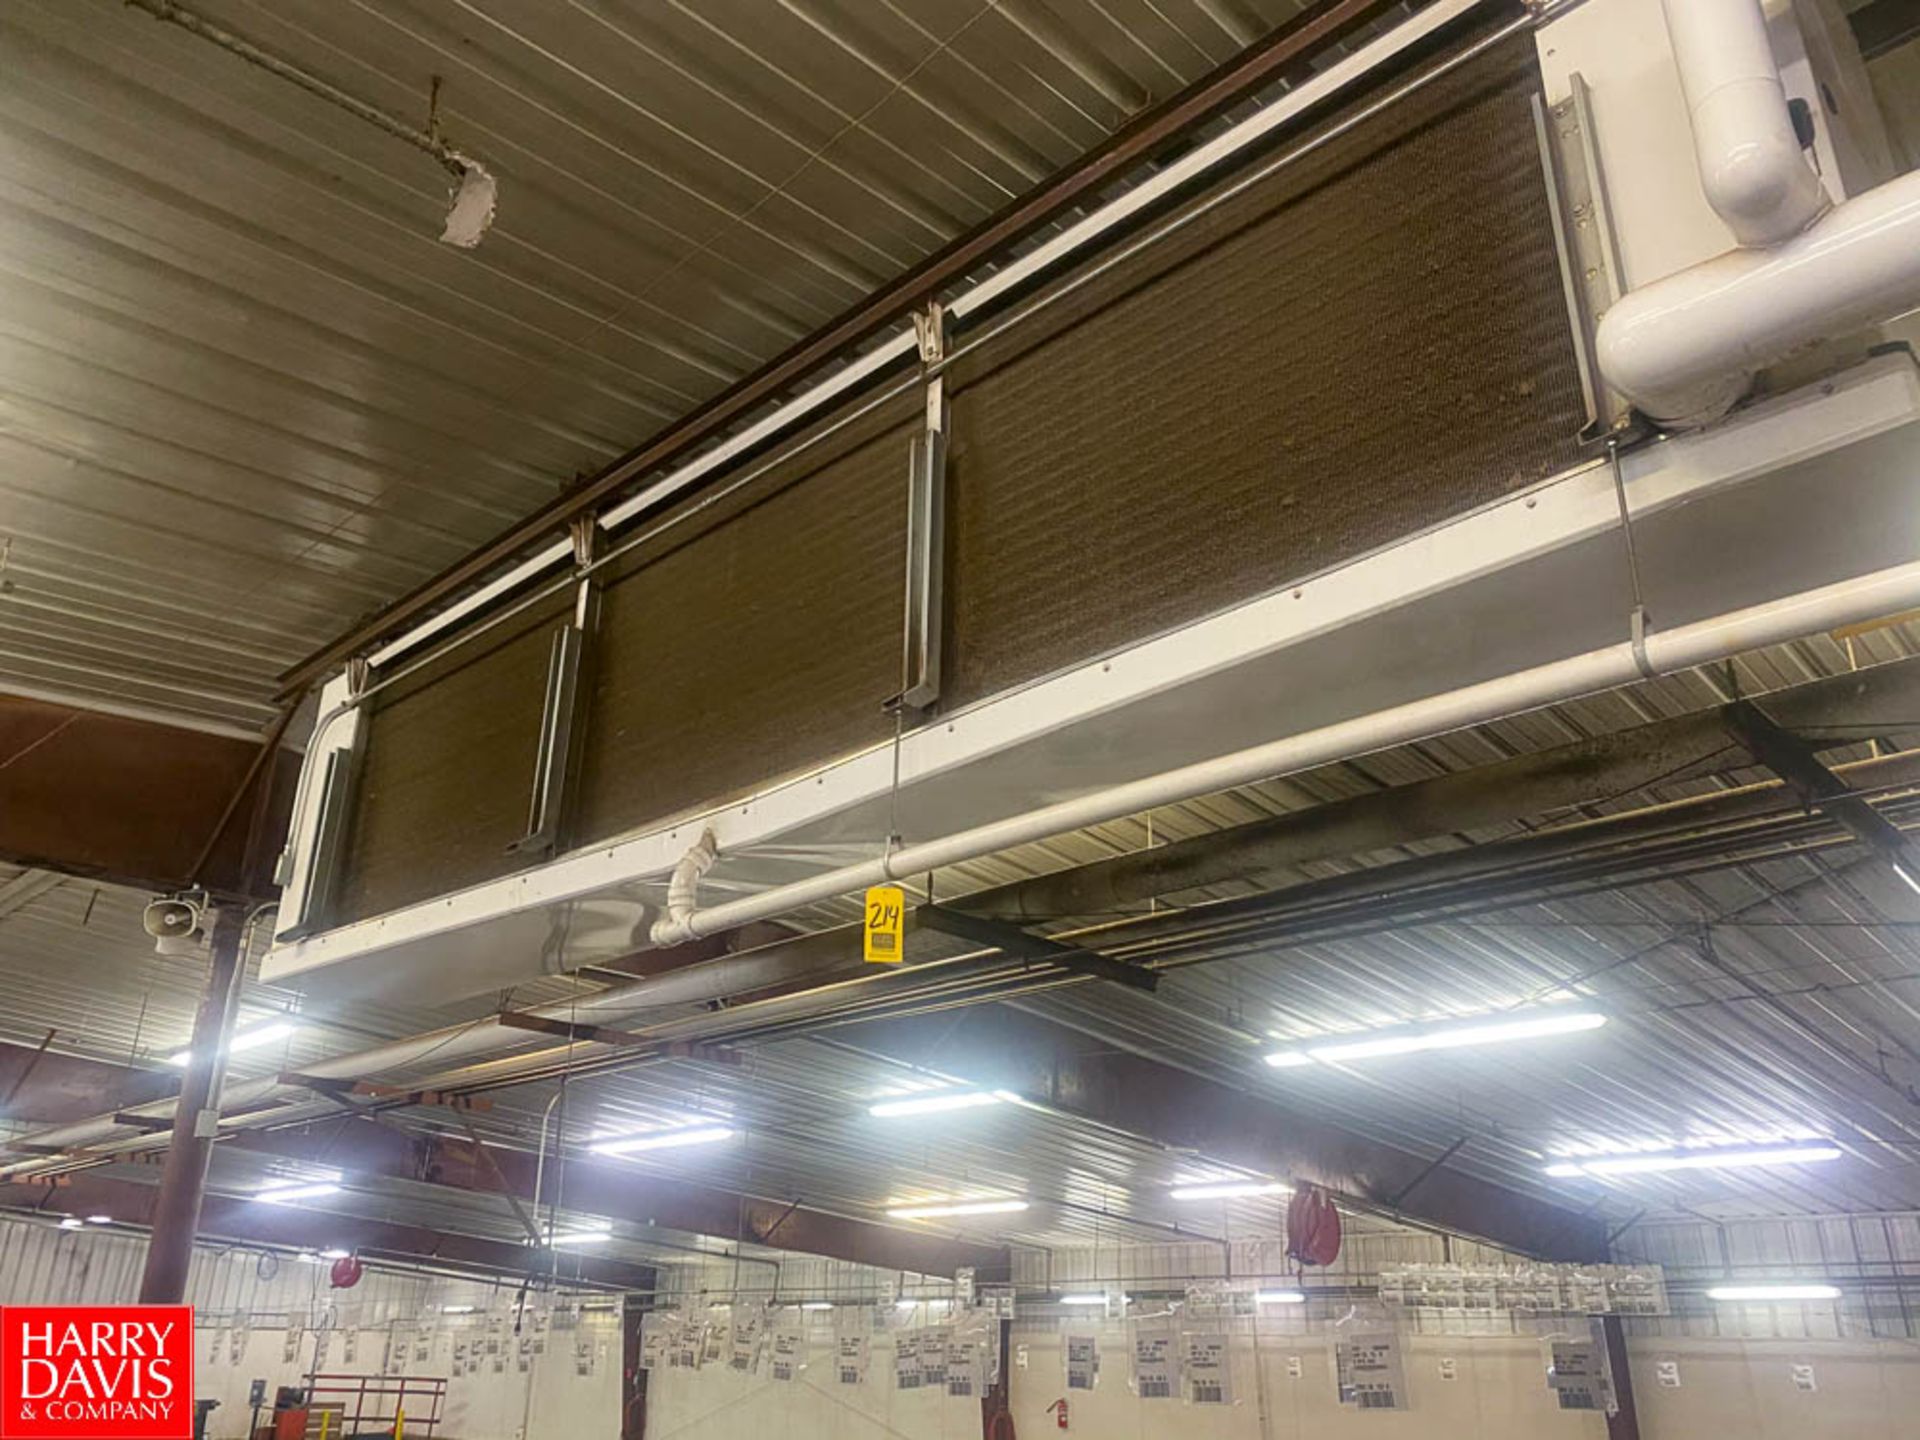 Gunther 3 Fan Chiller Model: 510058 With Vilter Controls And Valves - Rigging Fee: $ 1500